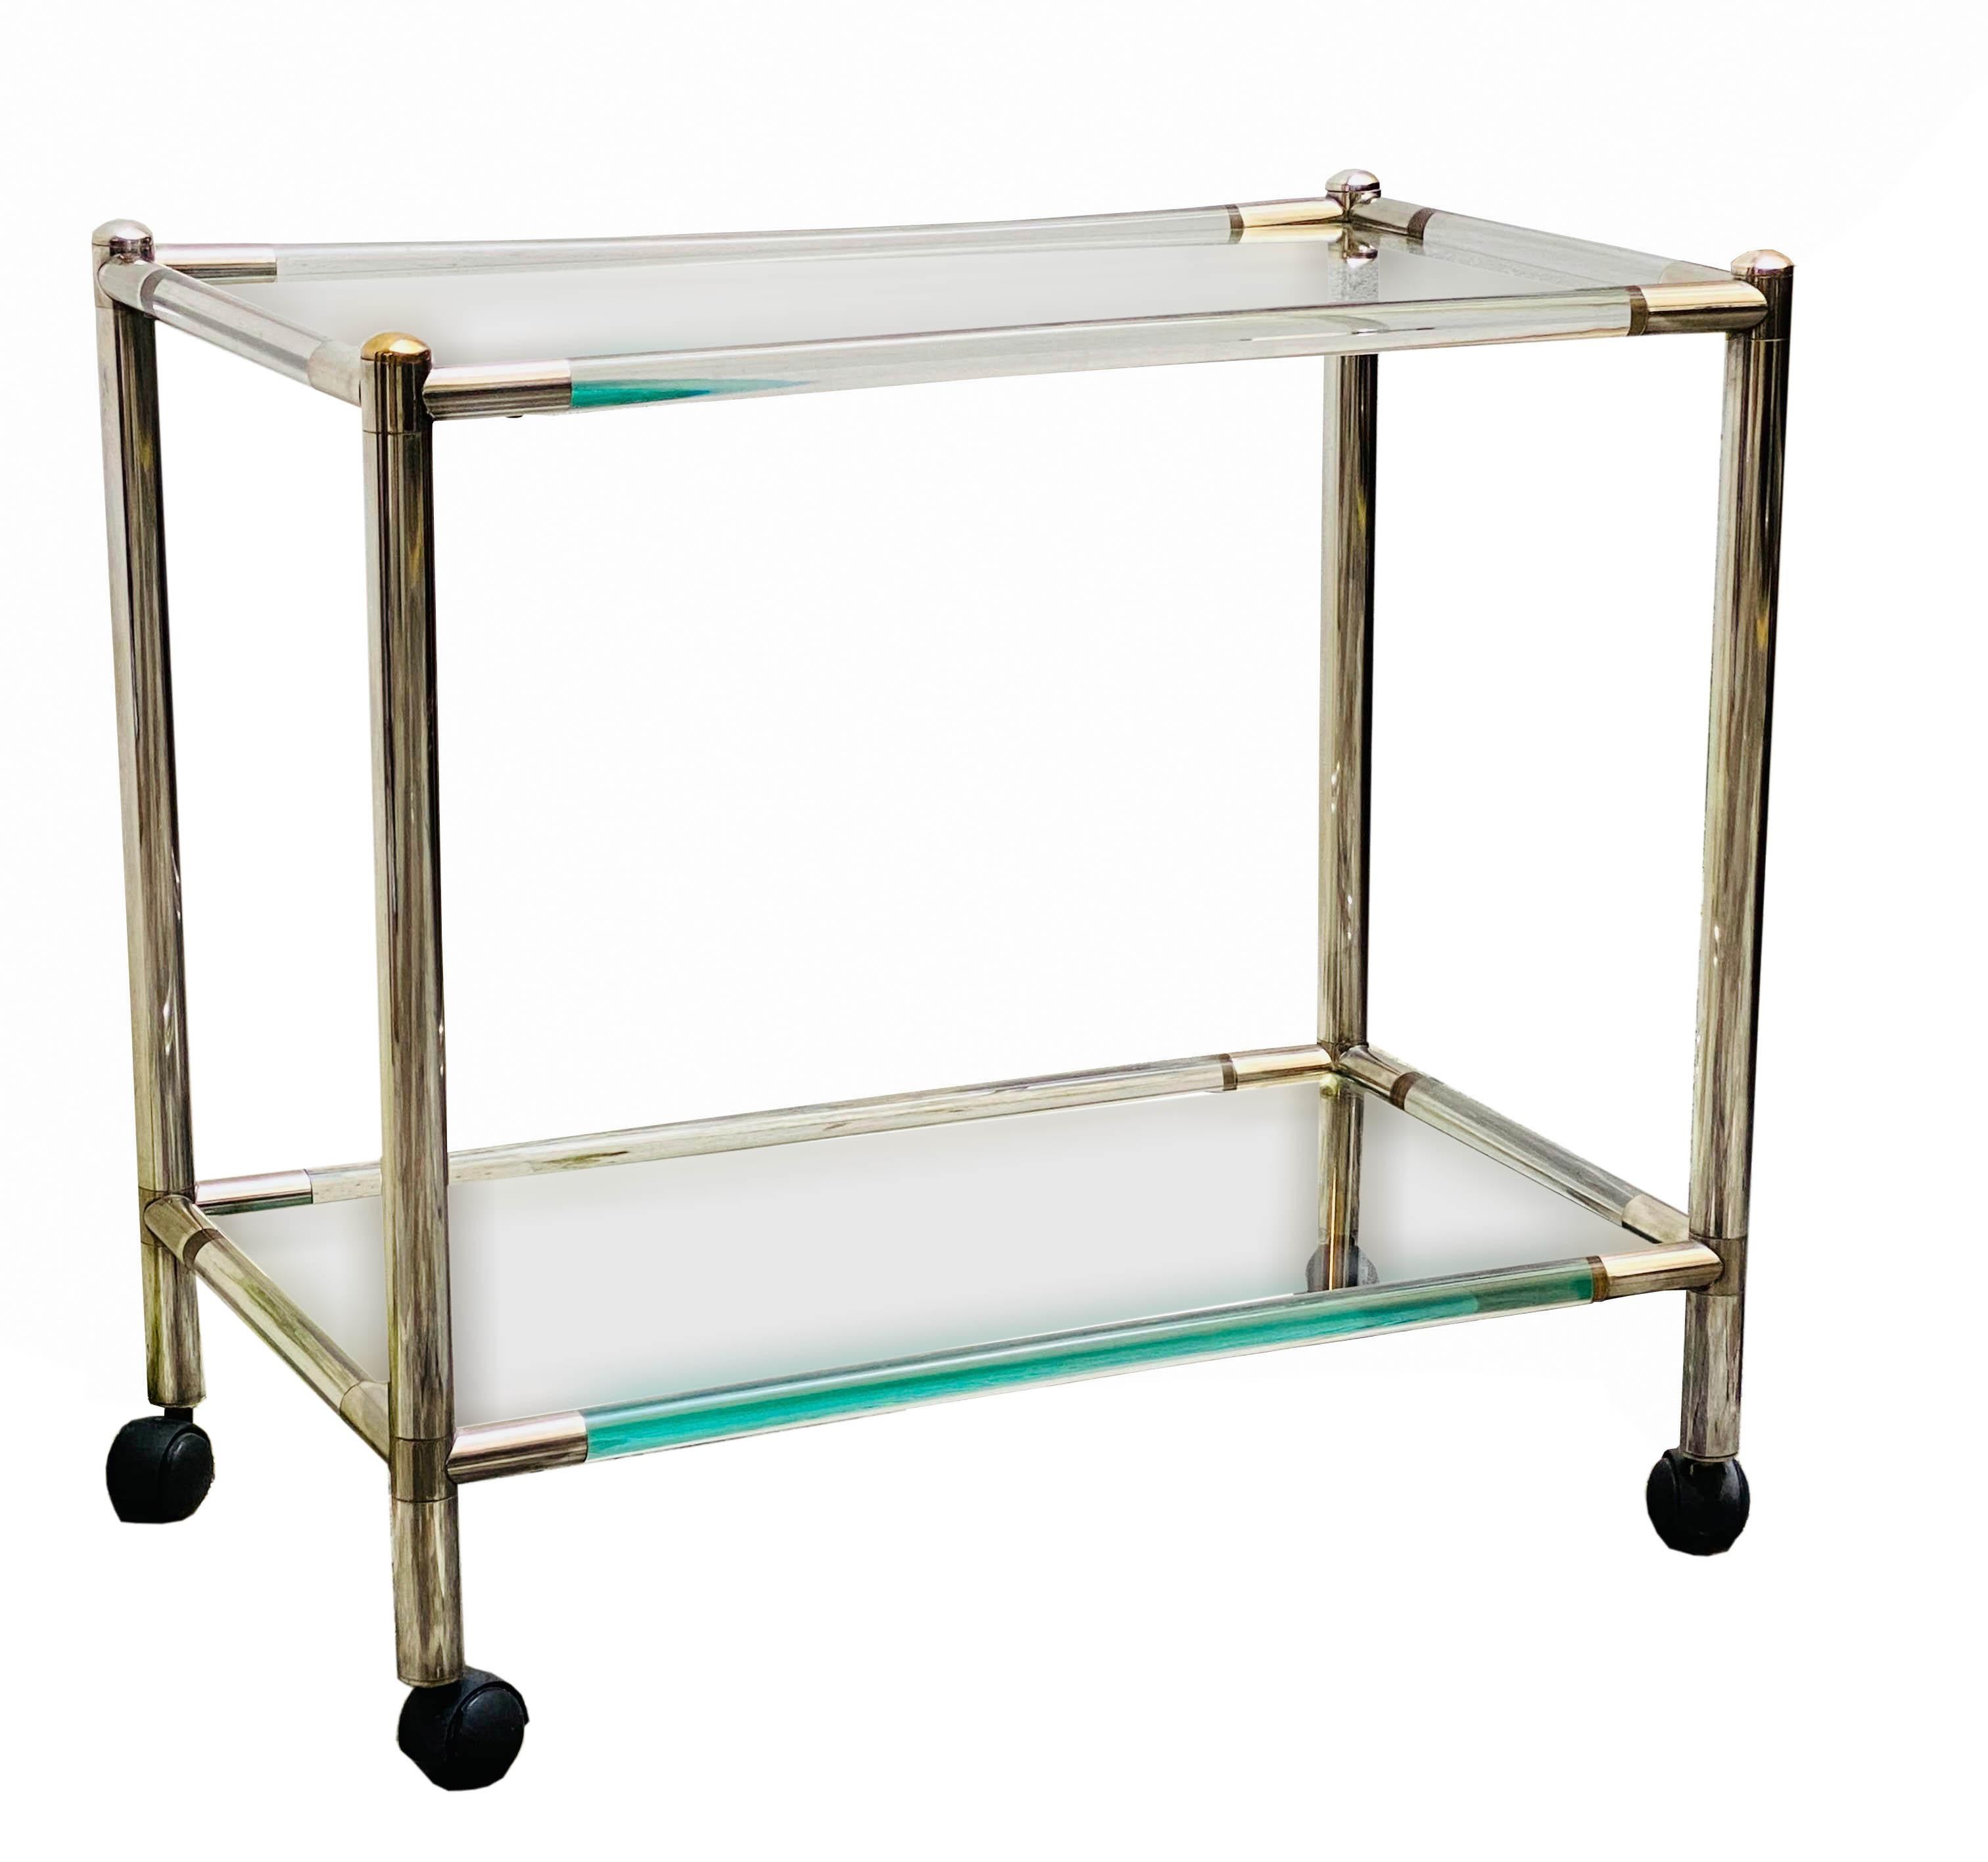 Lucite bar trolley, it has two internal transparent glass shelves that rest on black swivel wheels, the details are chrome-plated. Italian manufacture 1970.



